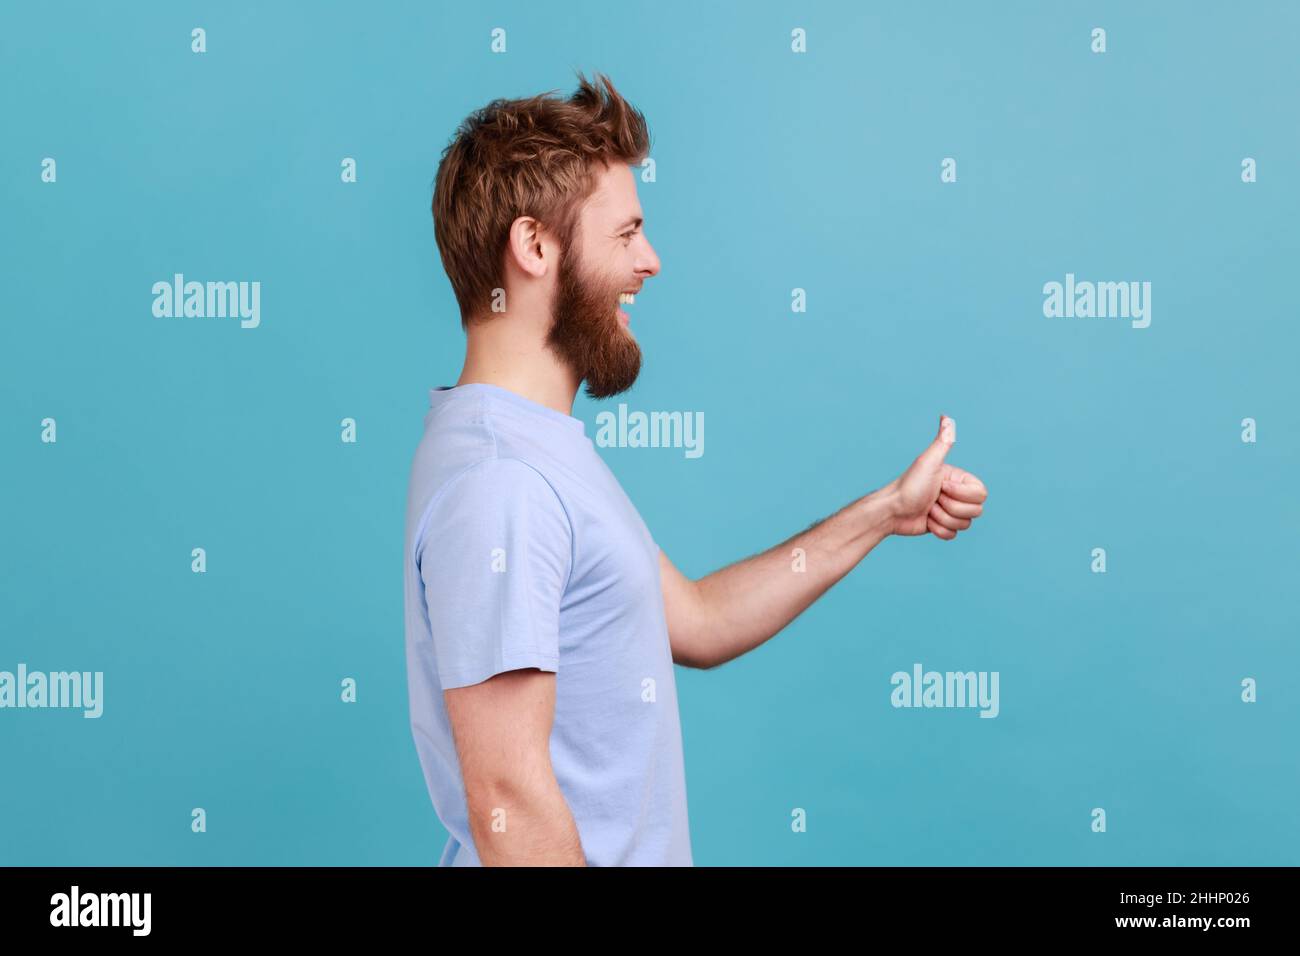 Side view of bearded man approves incredible promo keeps thumbs up likes and agrees being satisfied with something, happy expression. Indoor studio shot isolated on blue background. Stock Photo